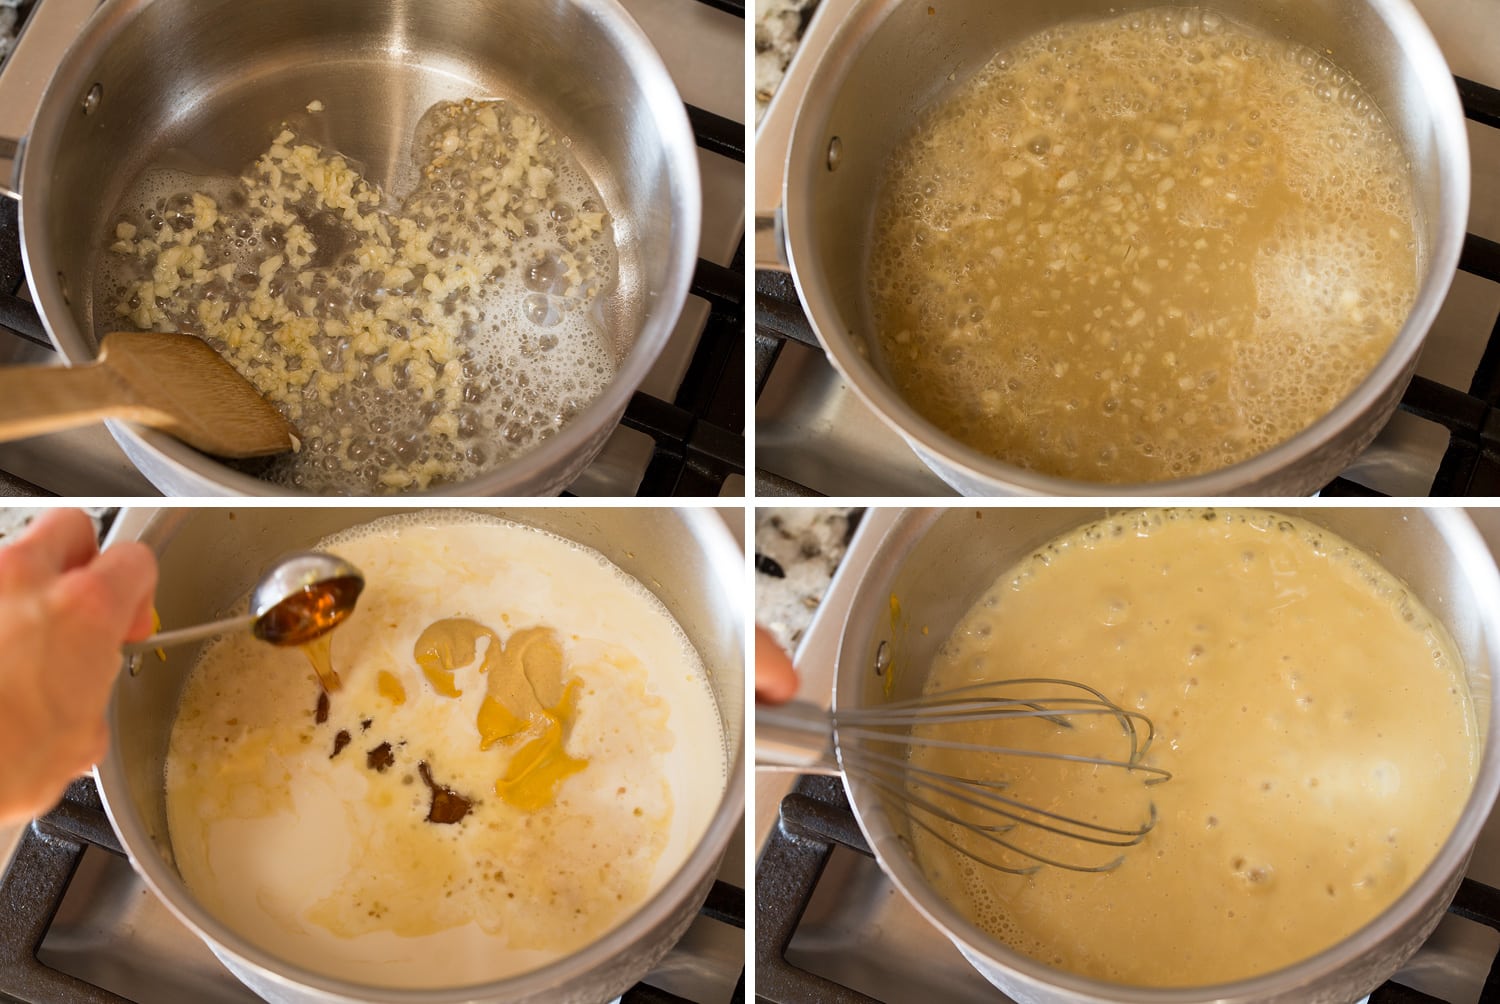 Images showing how to make sauce for chicken cordon bleu.